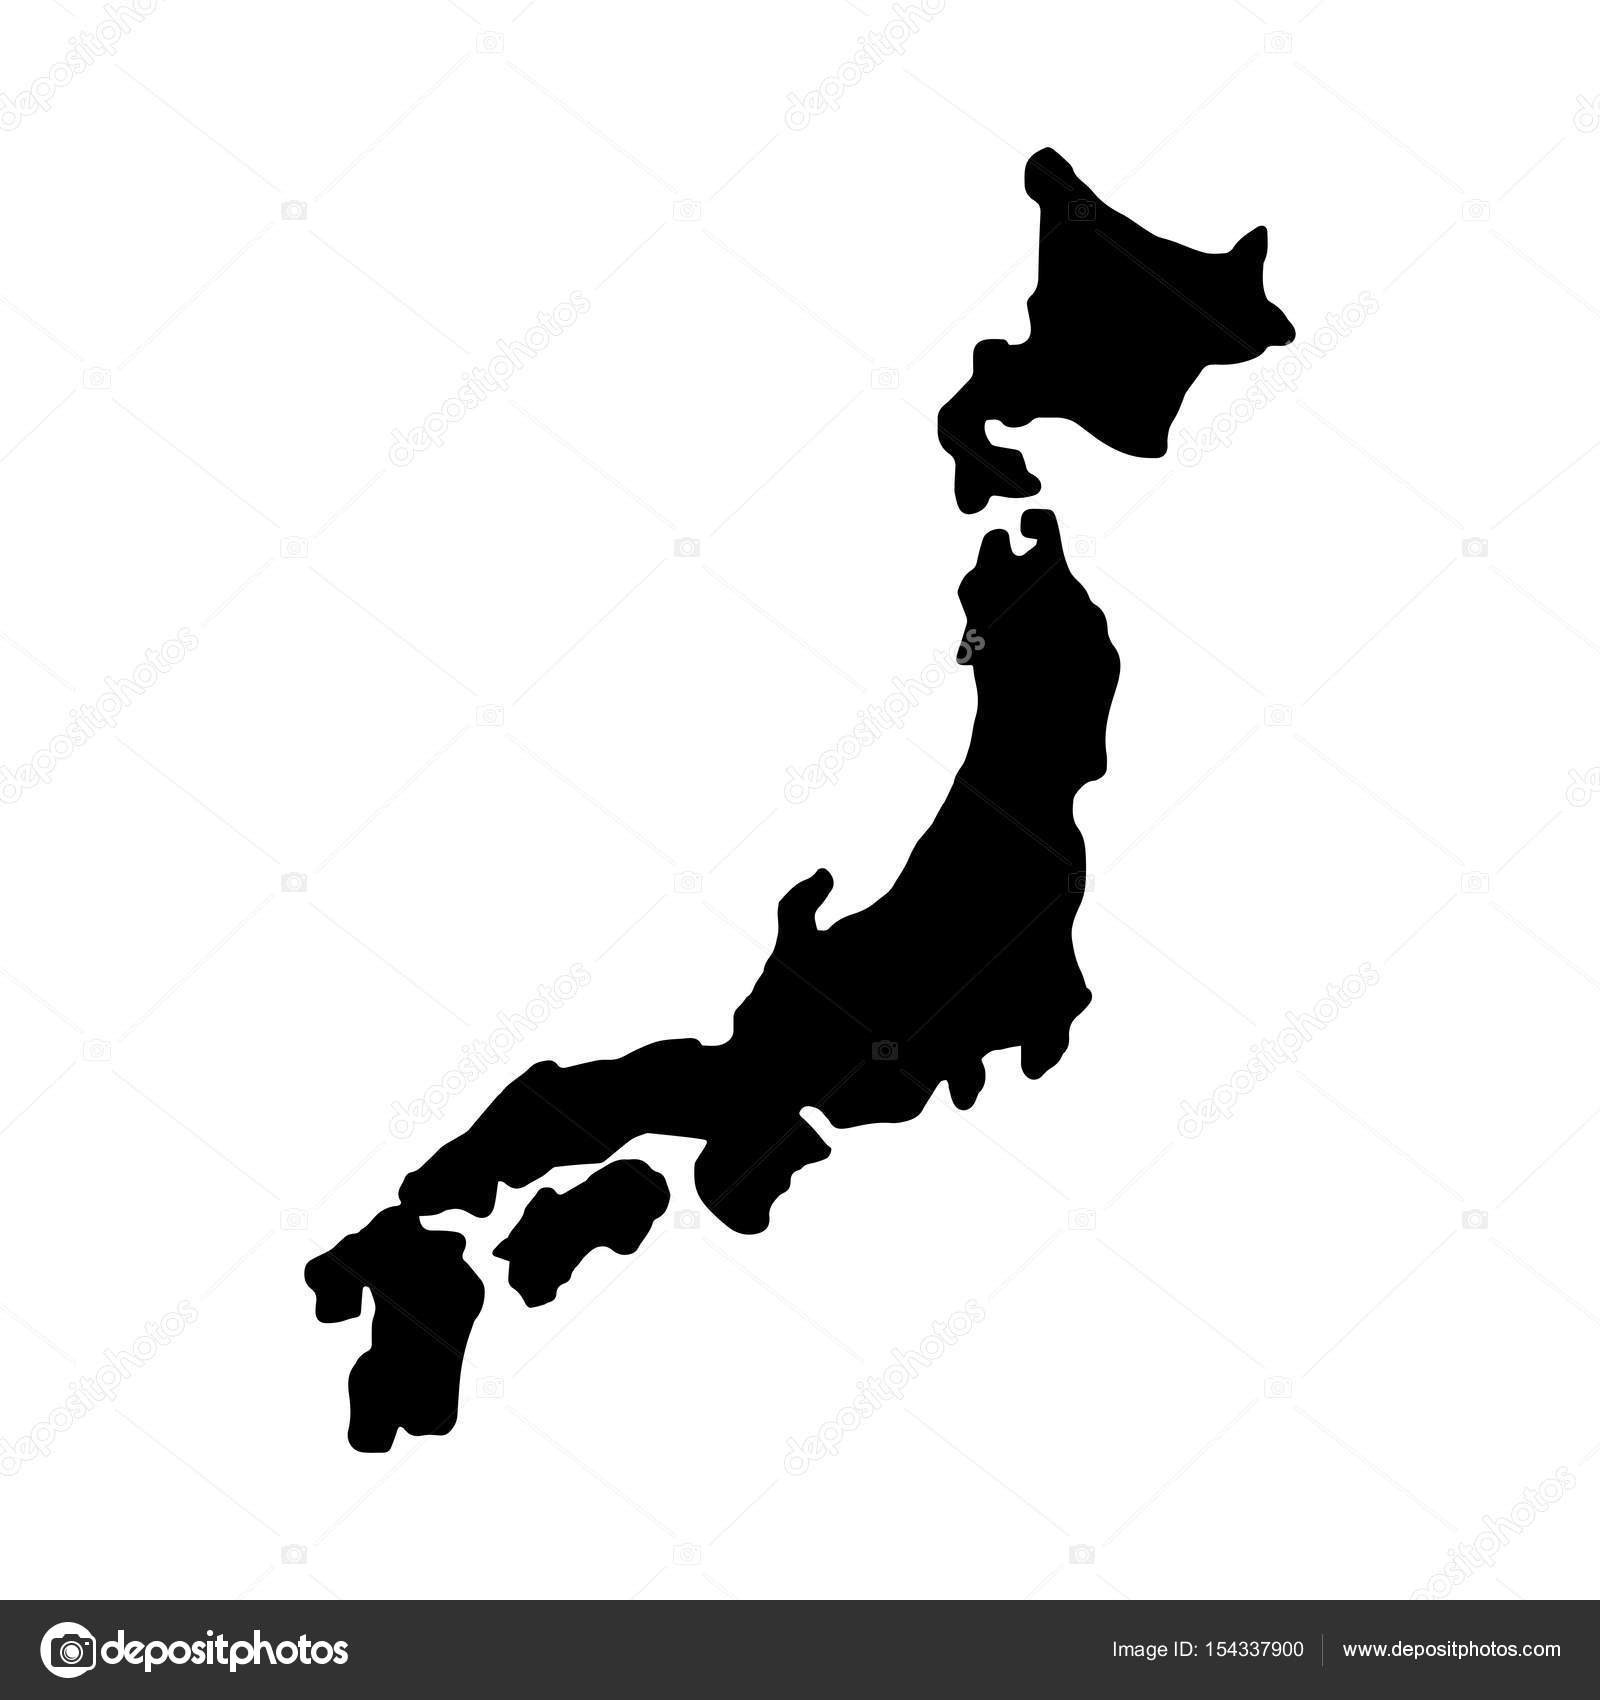 Japan Map Silhouette Vector Illustration Sketch Hand Drawn With Black Lines Isolated On White Background Vector Image By C Ad Vector Stock